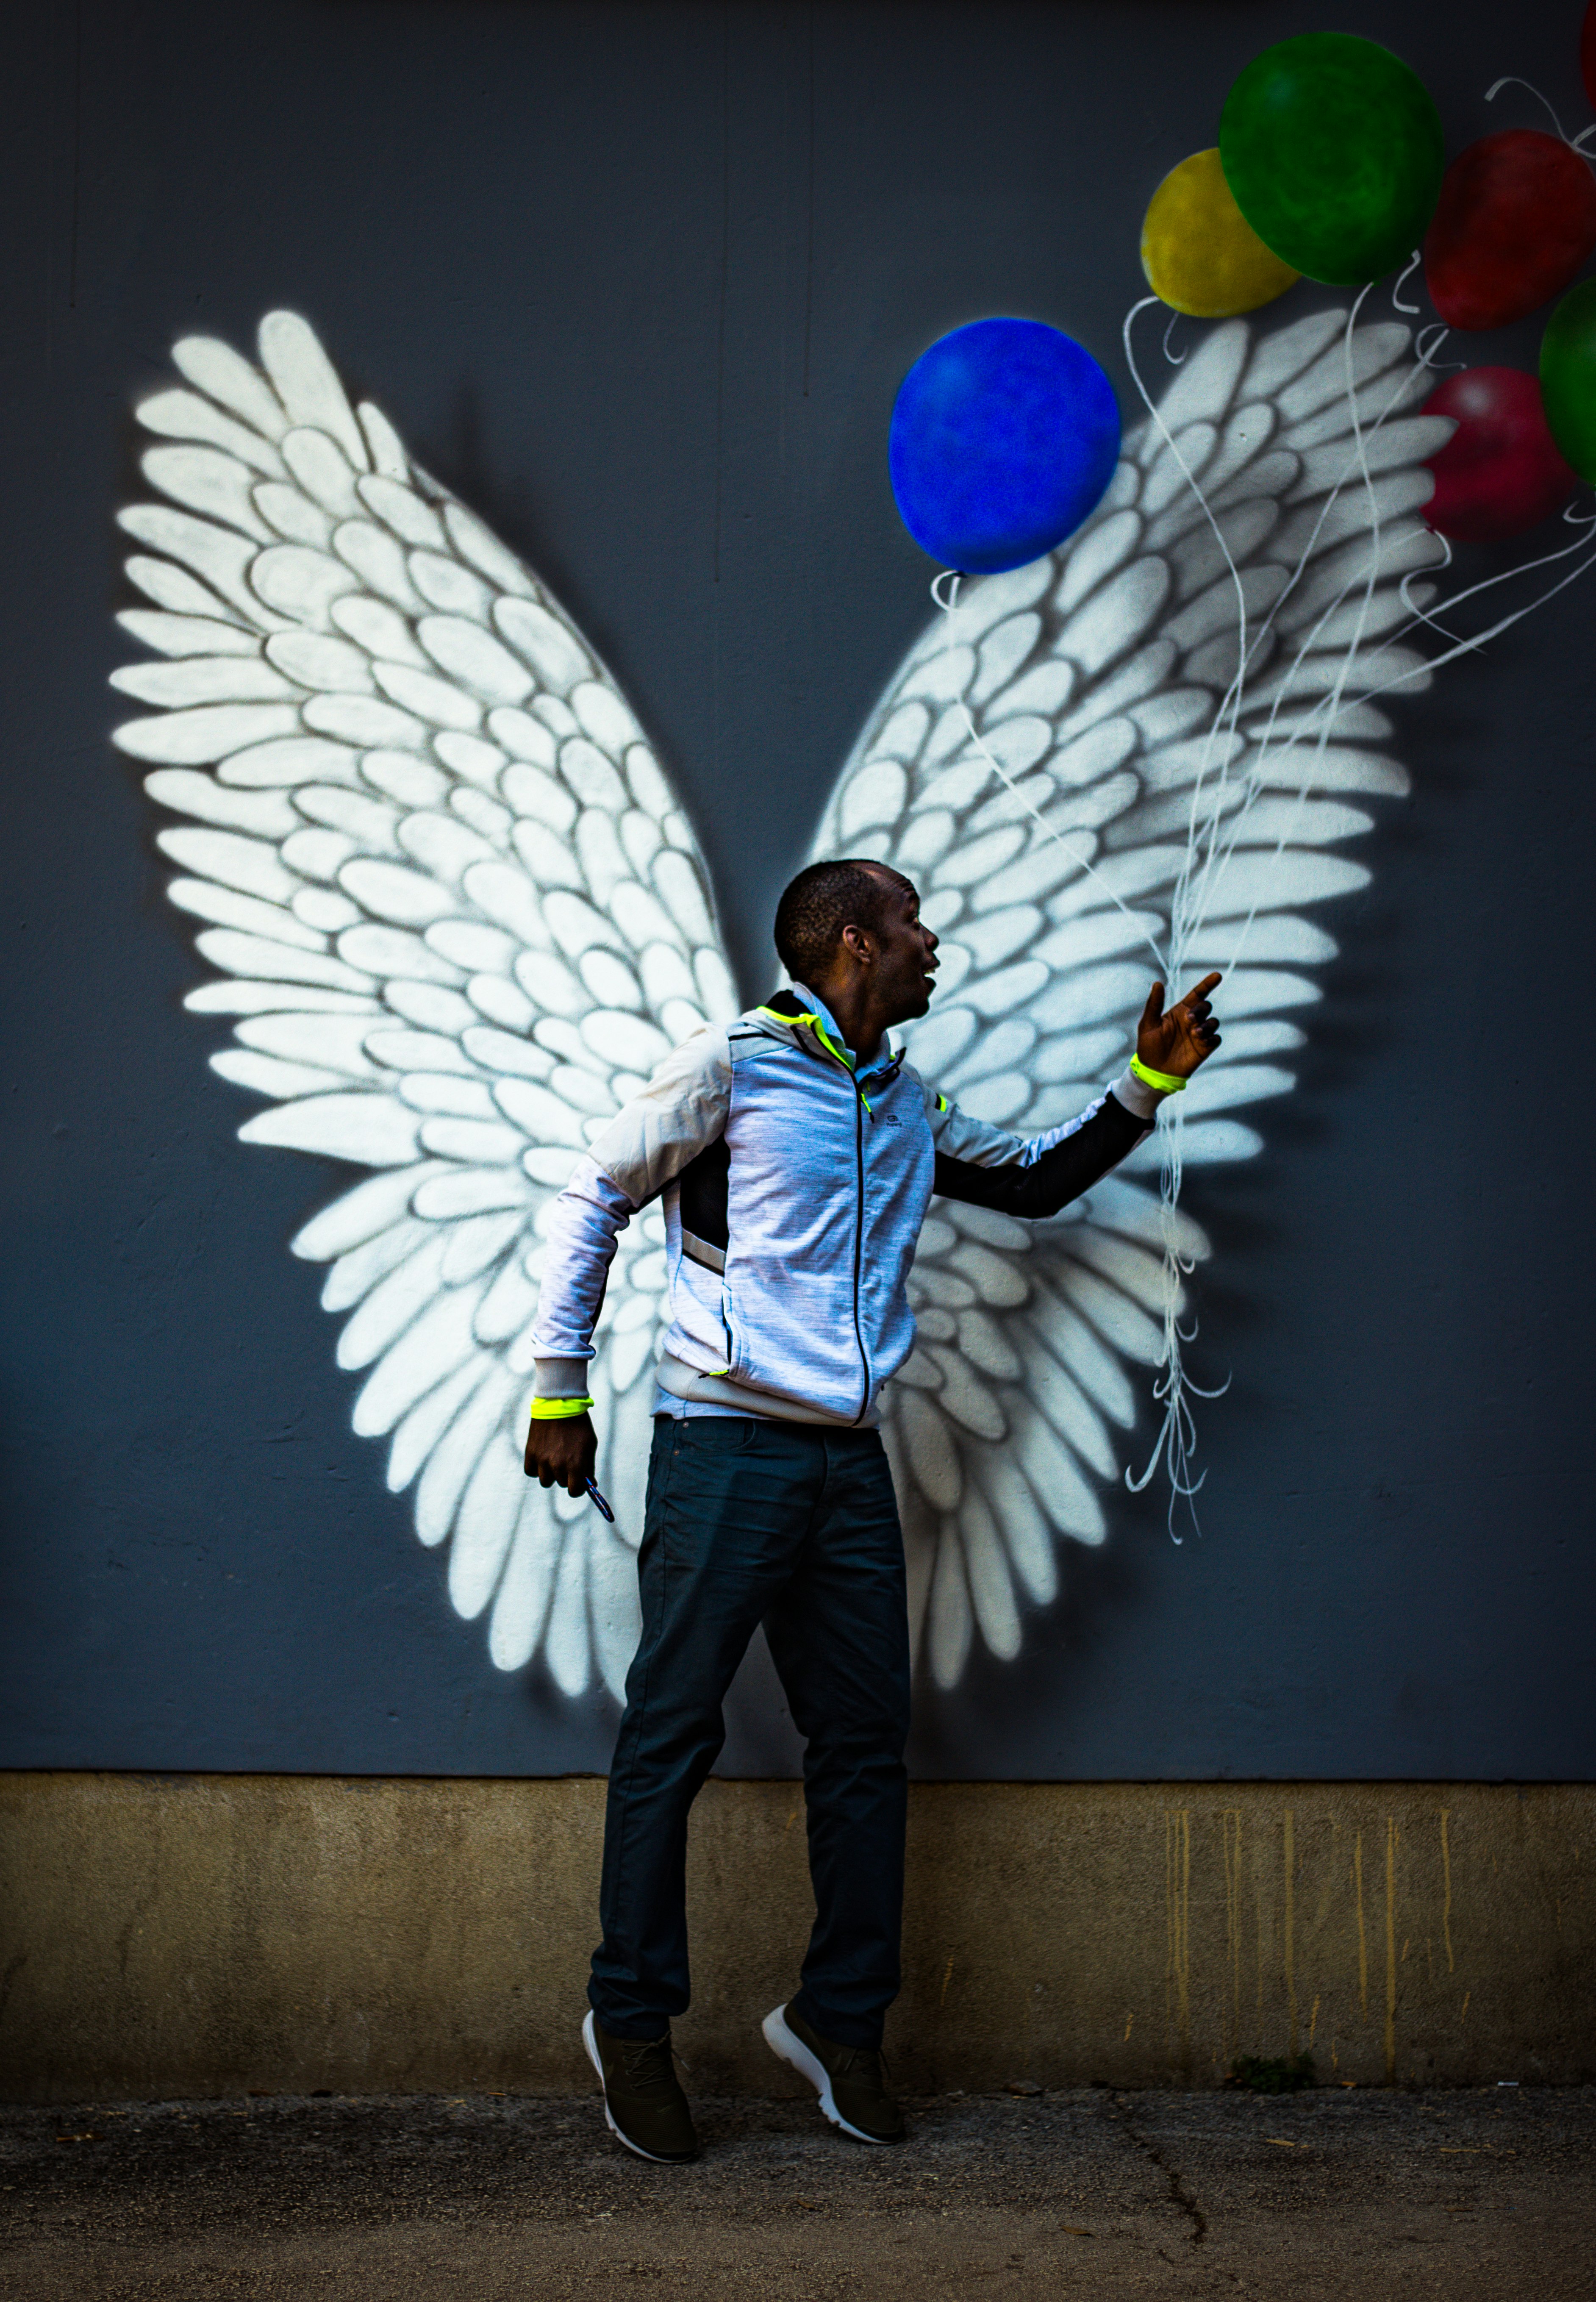 man standing in front of white wings and assorted-color balloons graffiti on wall